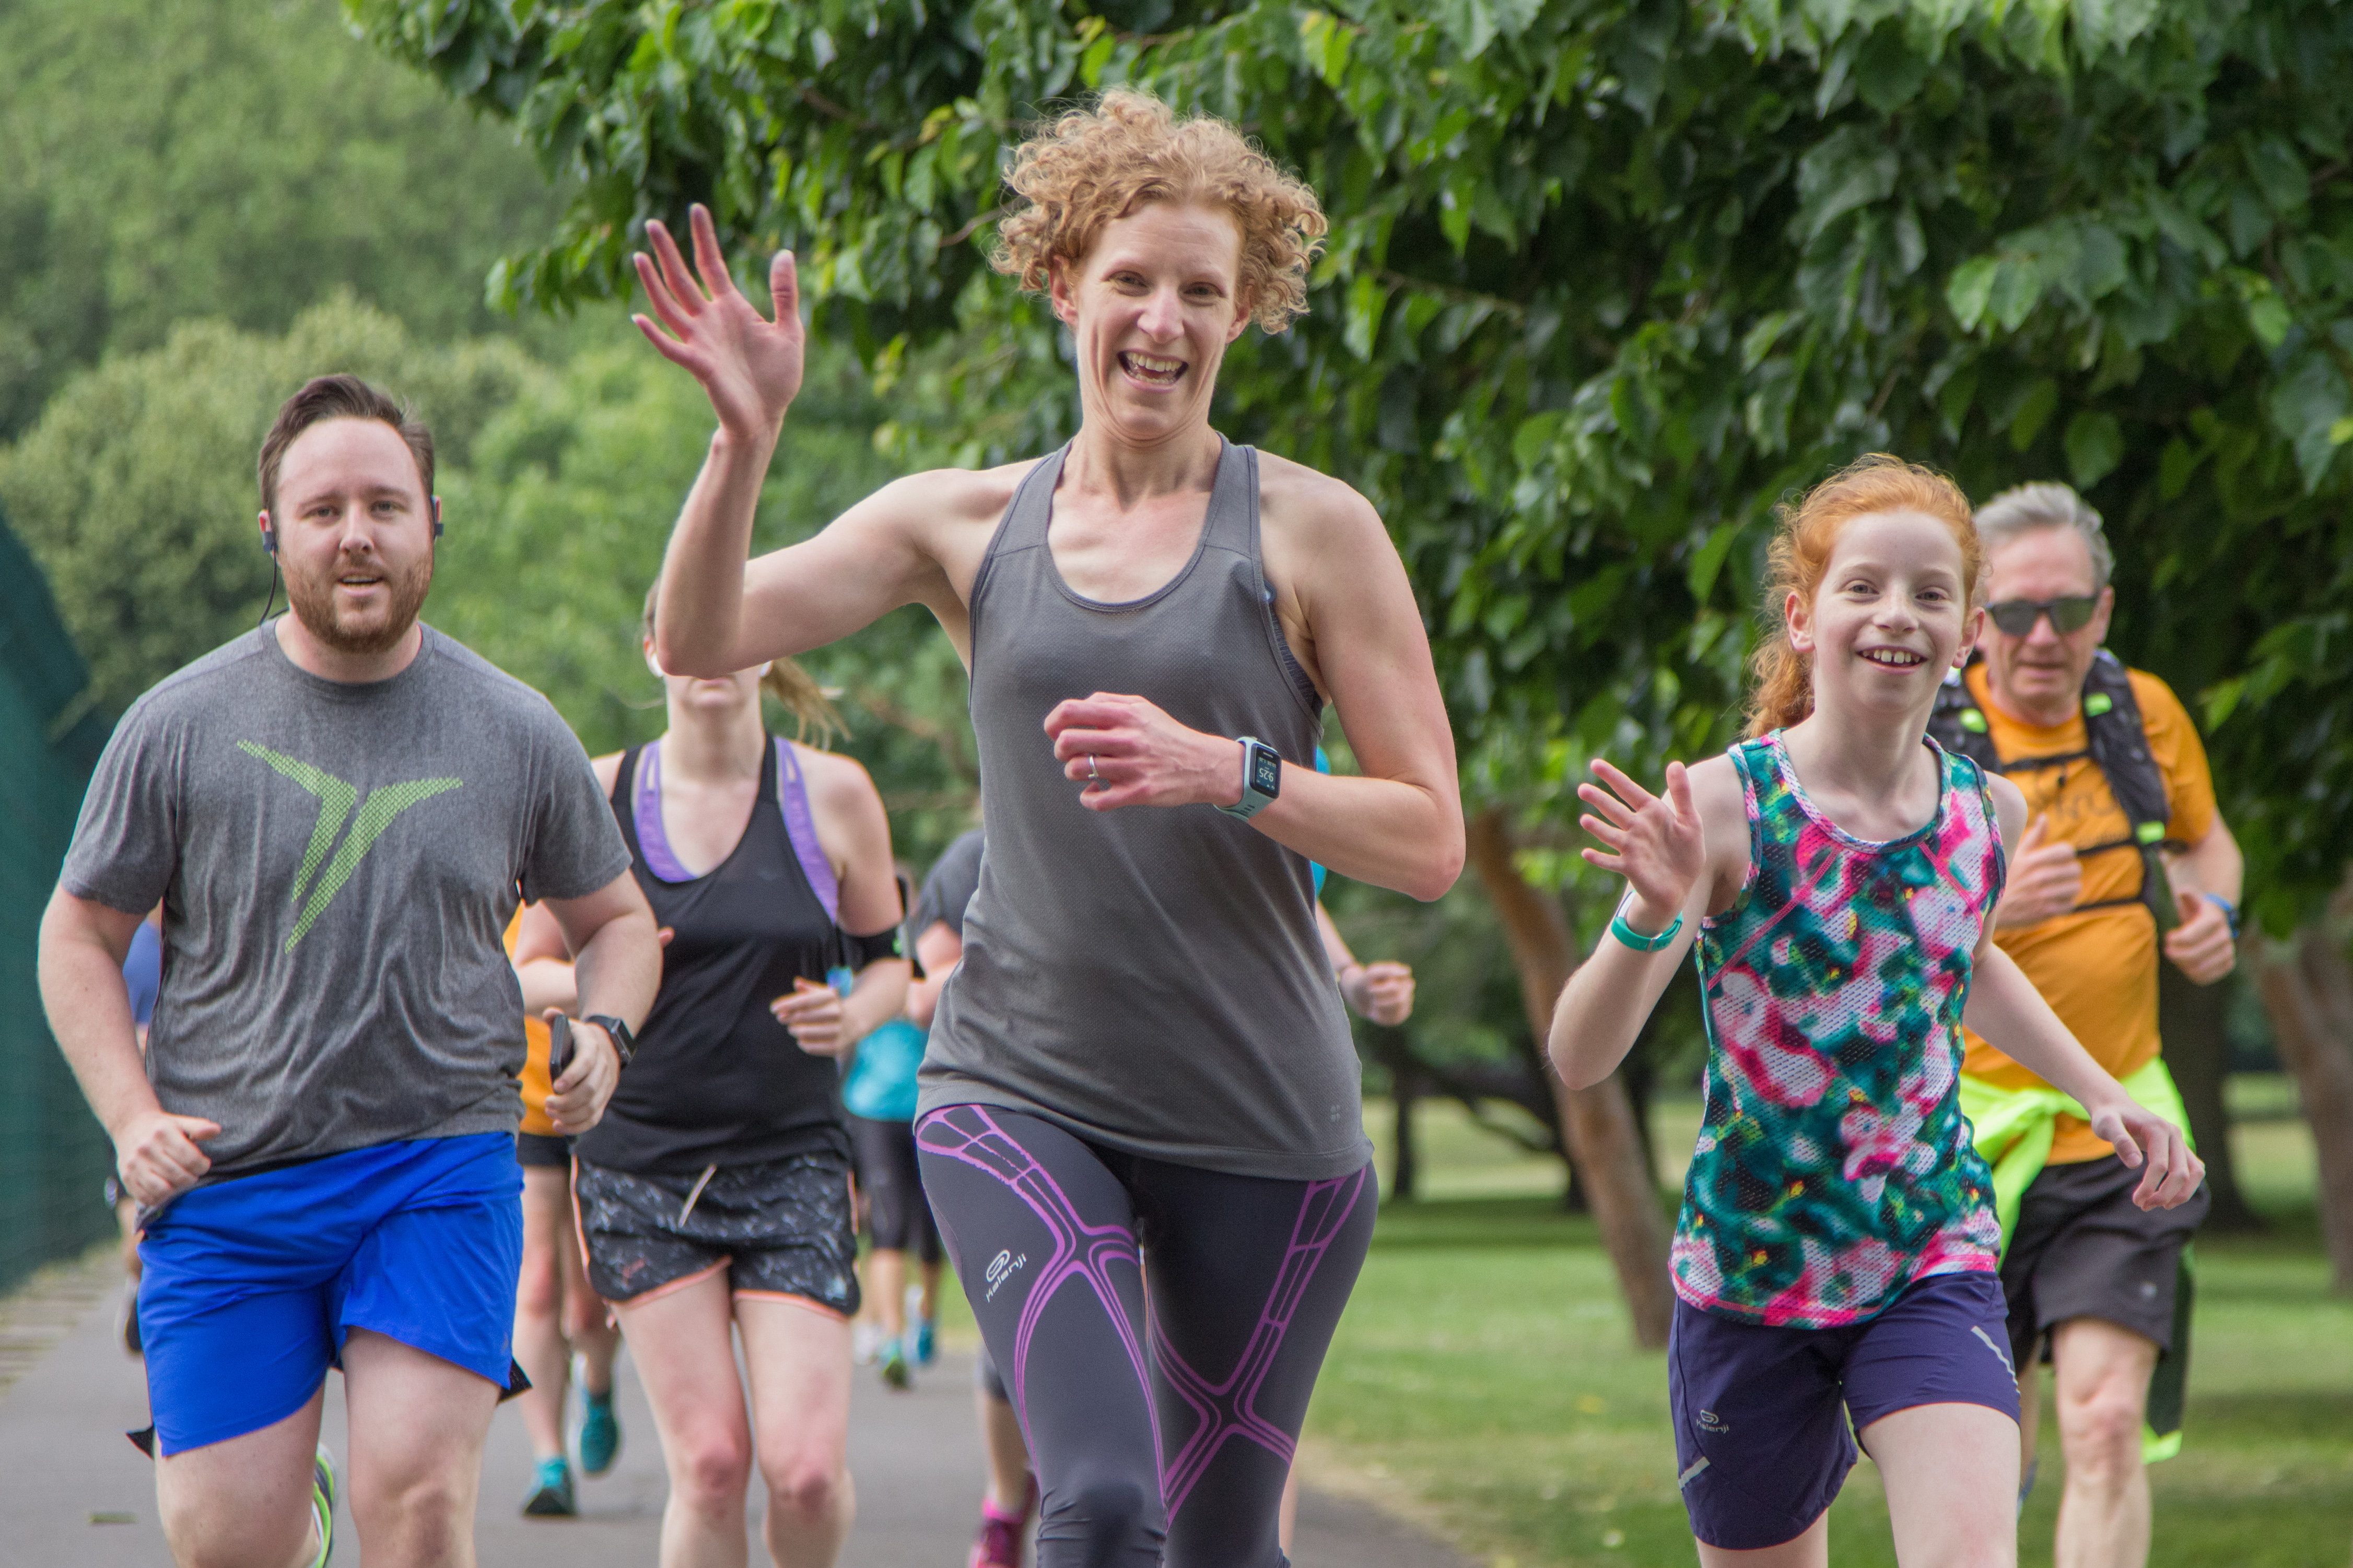 More than 600,000 women who have registered with parkrun are yet to take part 